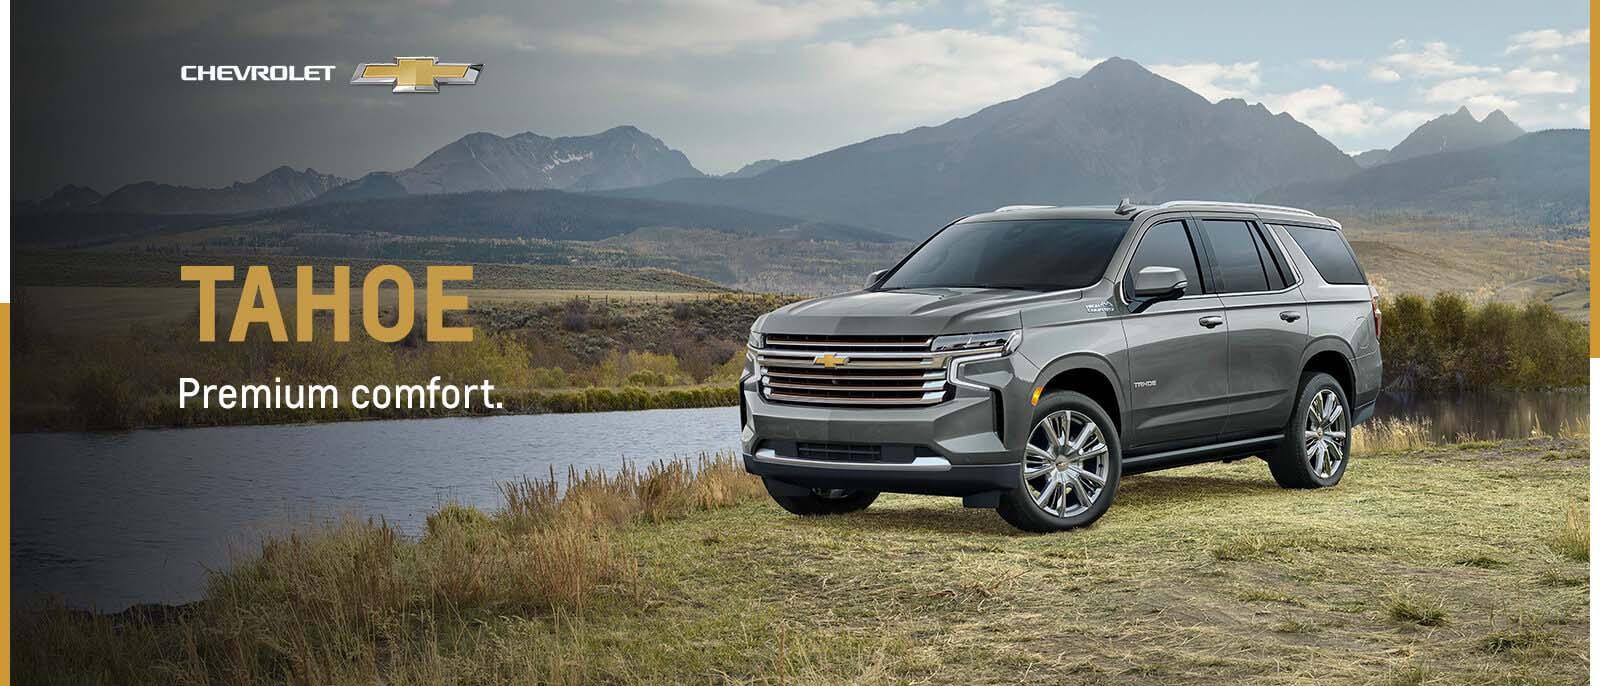 Grey Chevy Tahoe parked in nature with mountains in background 